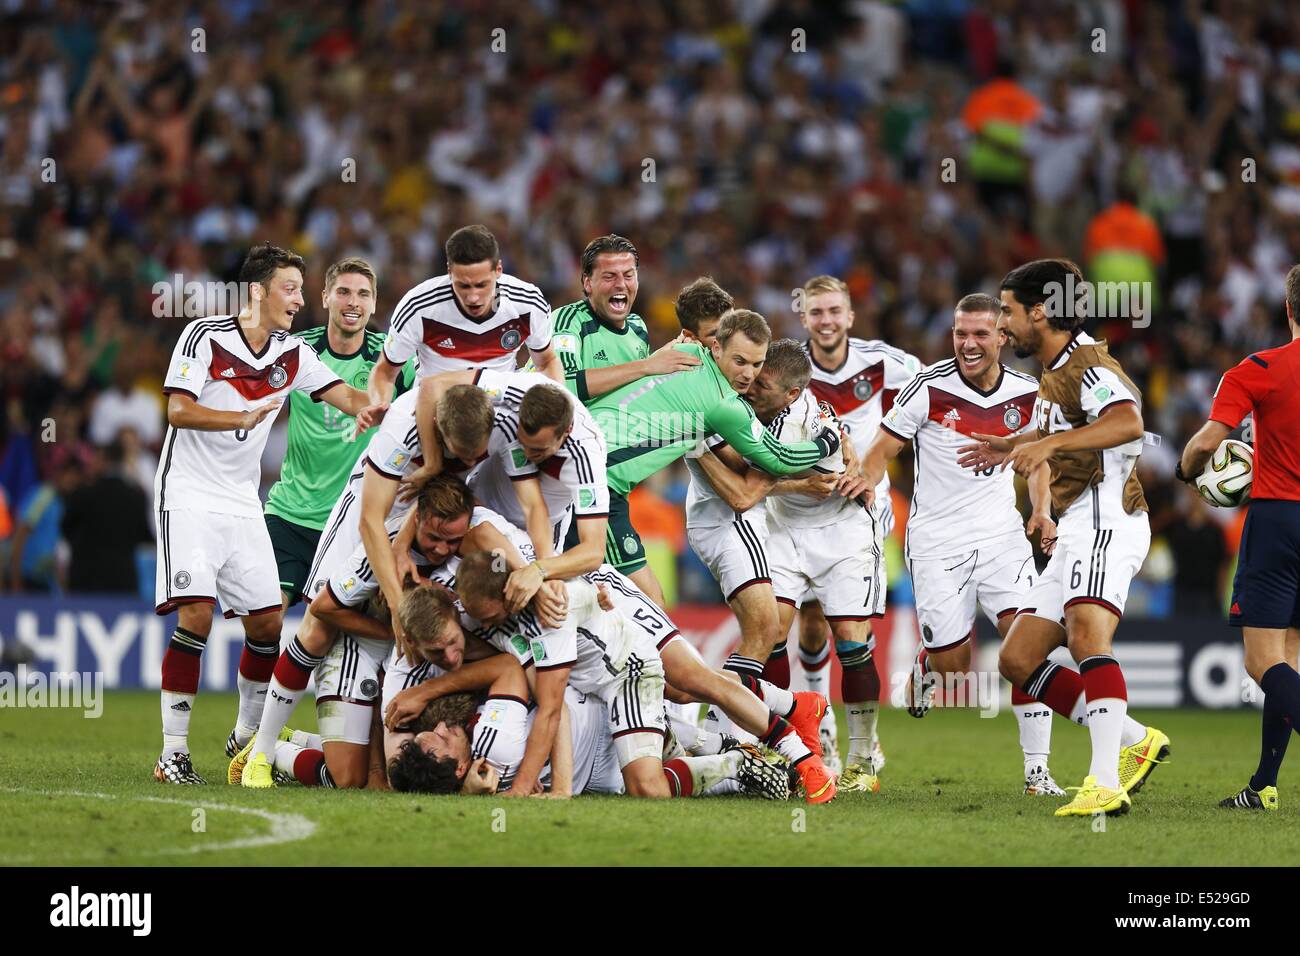 Germany team group (GER), JULY 13, 2014 - Football / Soccer : Germany players celebrate after winning FIFA World Cup Brazil 2014 Final match  between Germany and Argentina at the Maracana stadium in Rio de Janeiro,  Brazil. (Photo by AFLO) Stock Photo